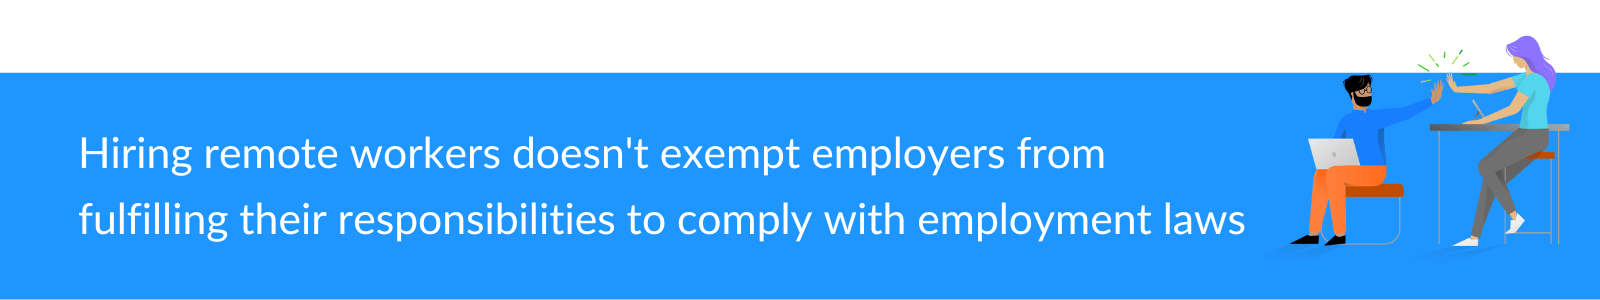 Hiring remote workers doesn't exempt employers from fulfilling their responsibilities to comply with employment laws.